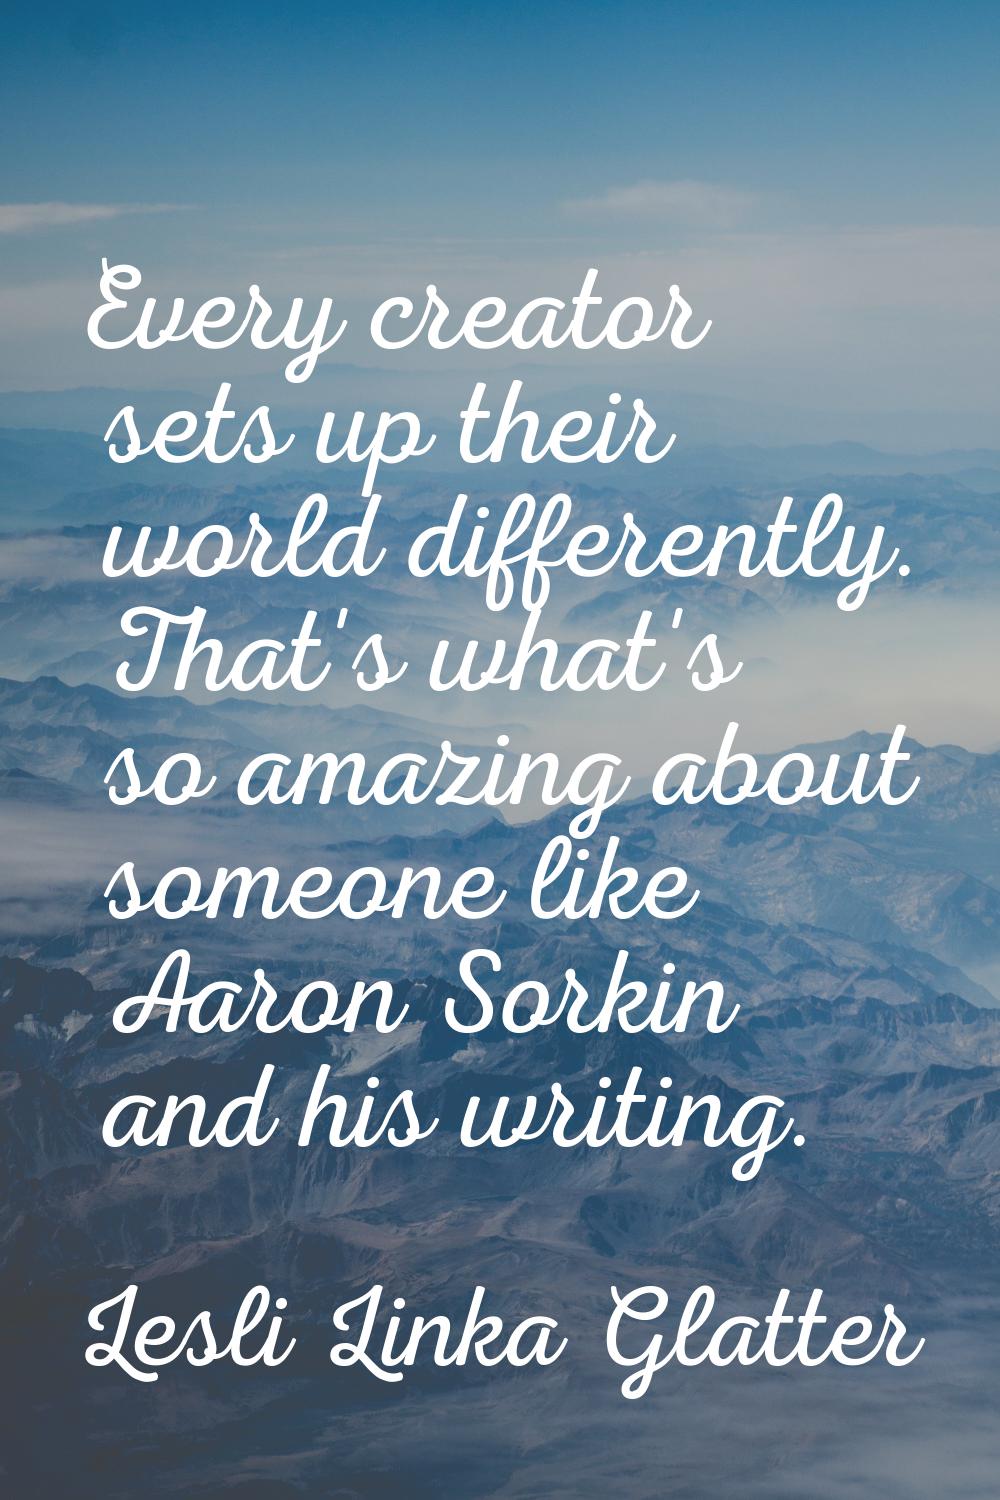 Every creator sets up their world differently. That's what's so amazing about someone like Aaron So